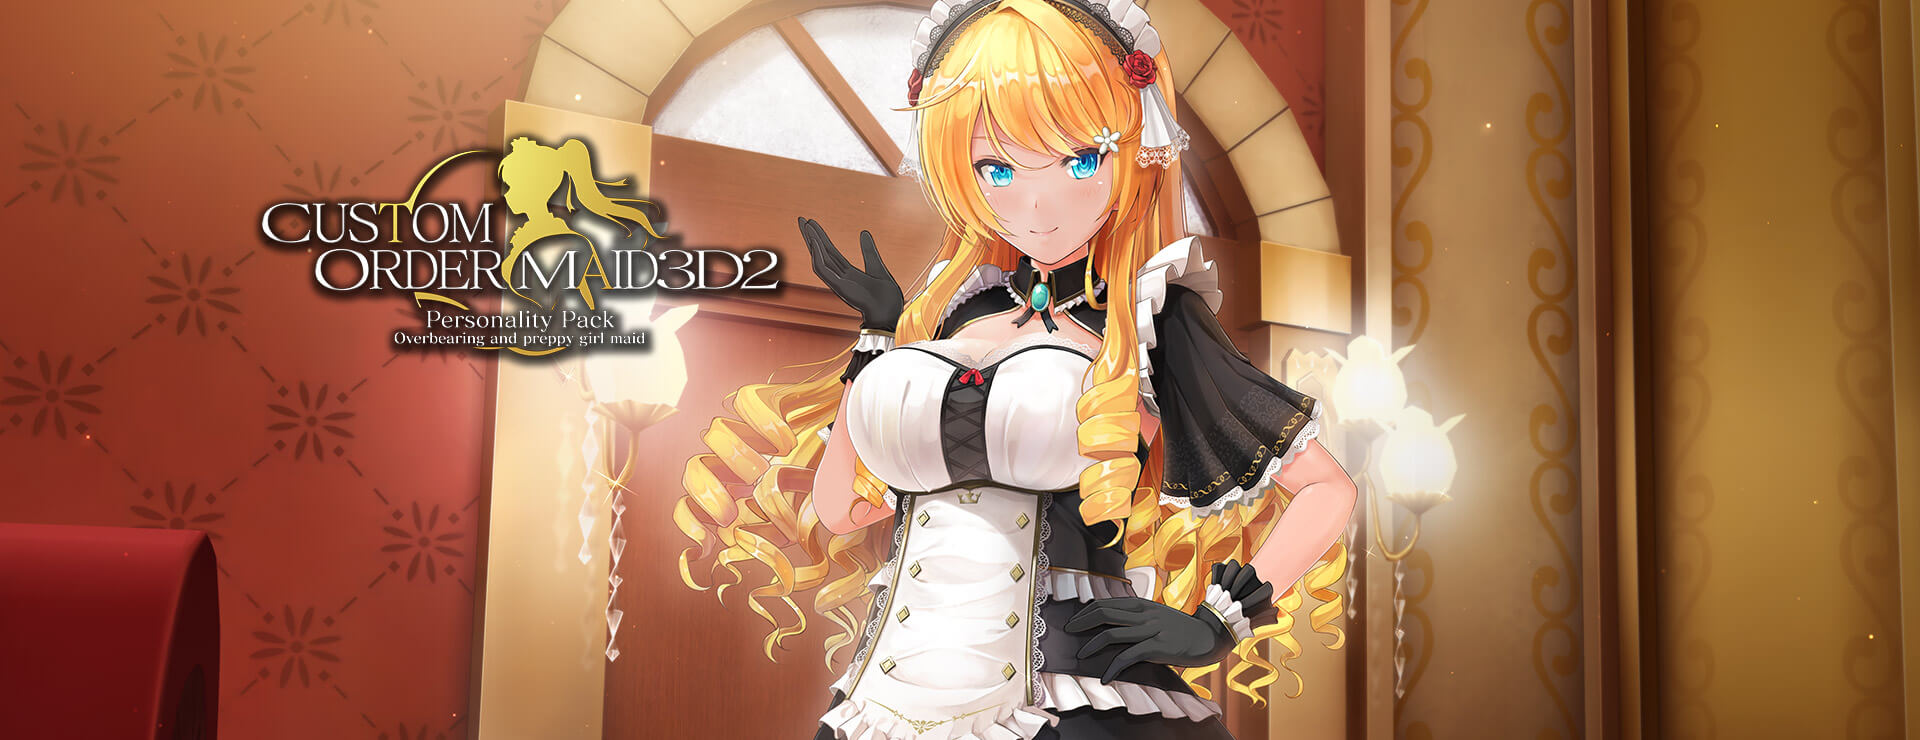 Custom Order Maid 3D2: Overbearing and Preppy Girl Maid DLC - Simulation Game